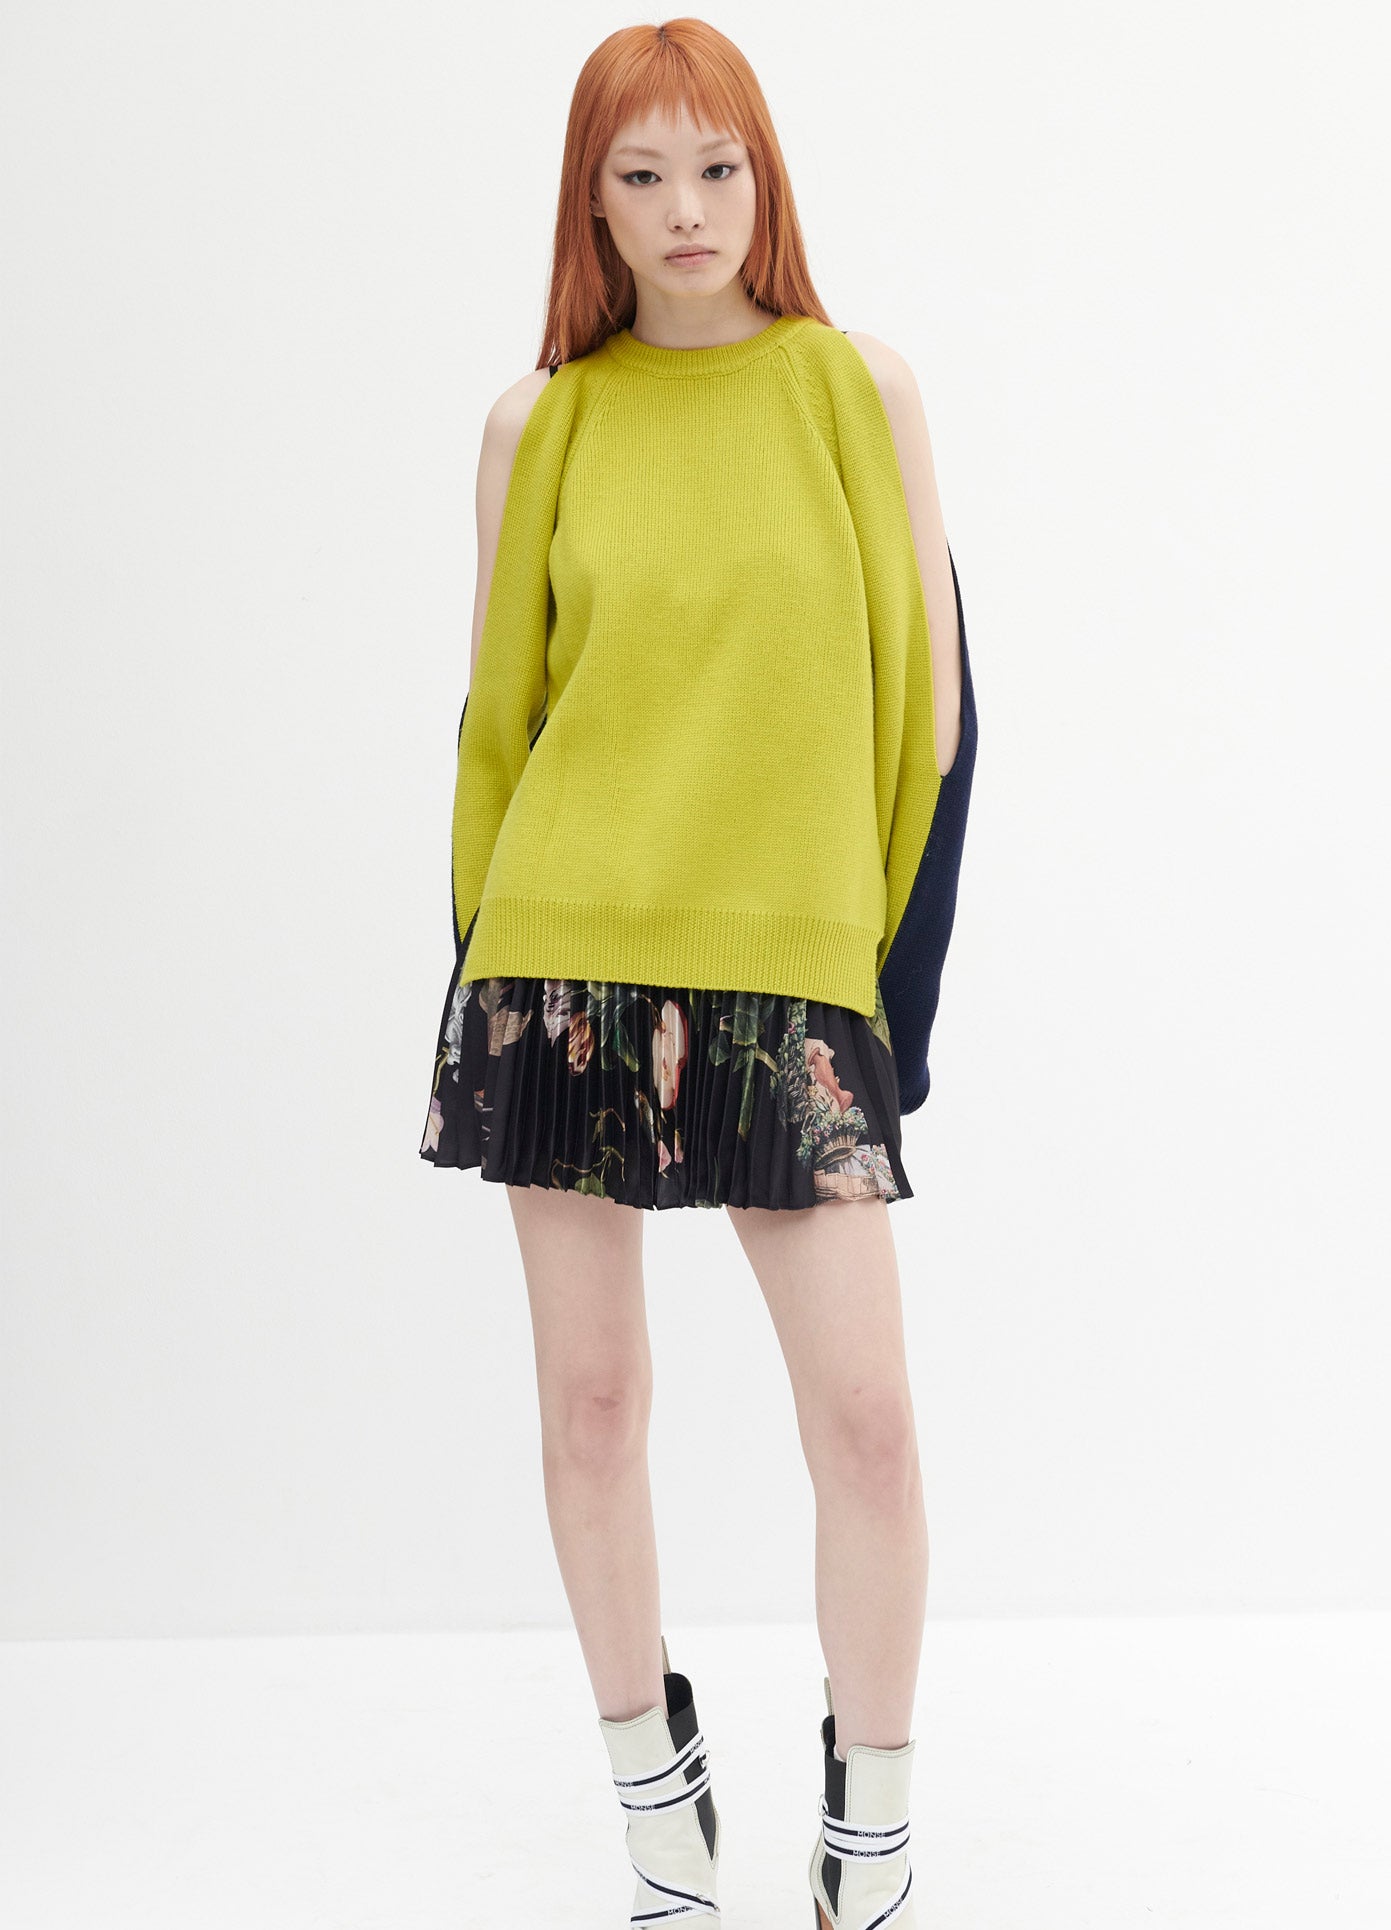 MONSE Two Tone Sleeve Slit Sweater in Lime and Navy on Model Full Front View